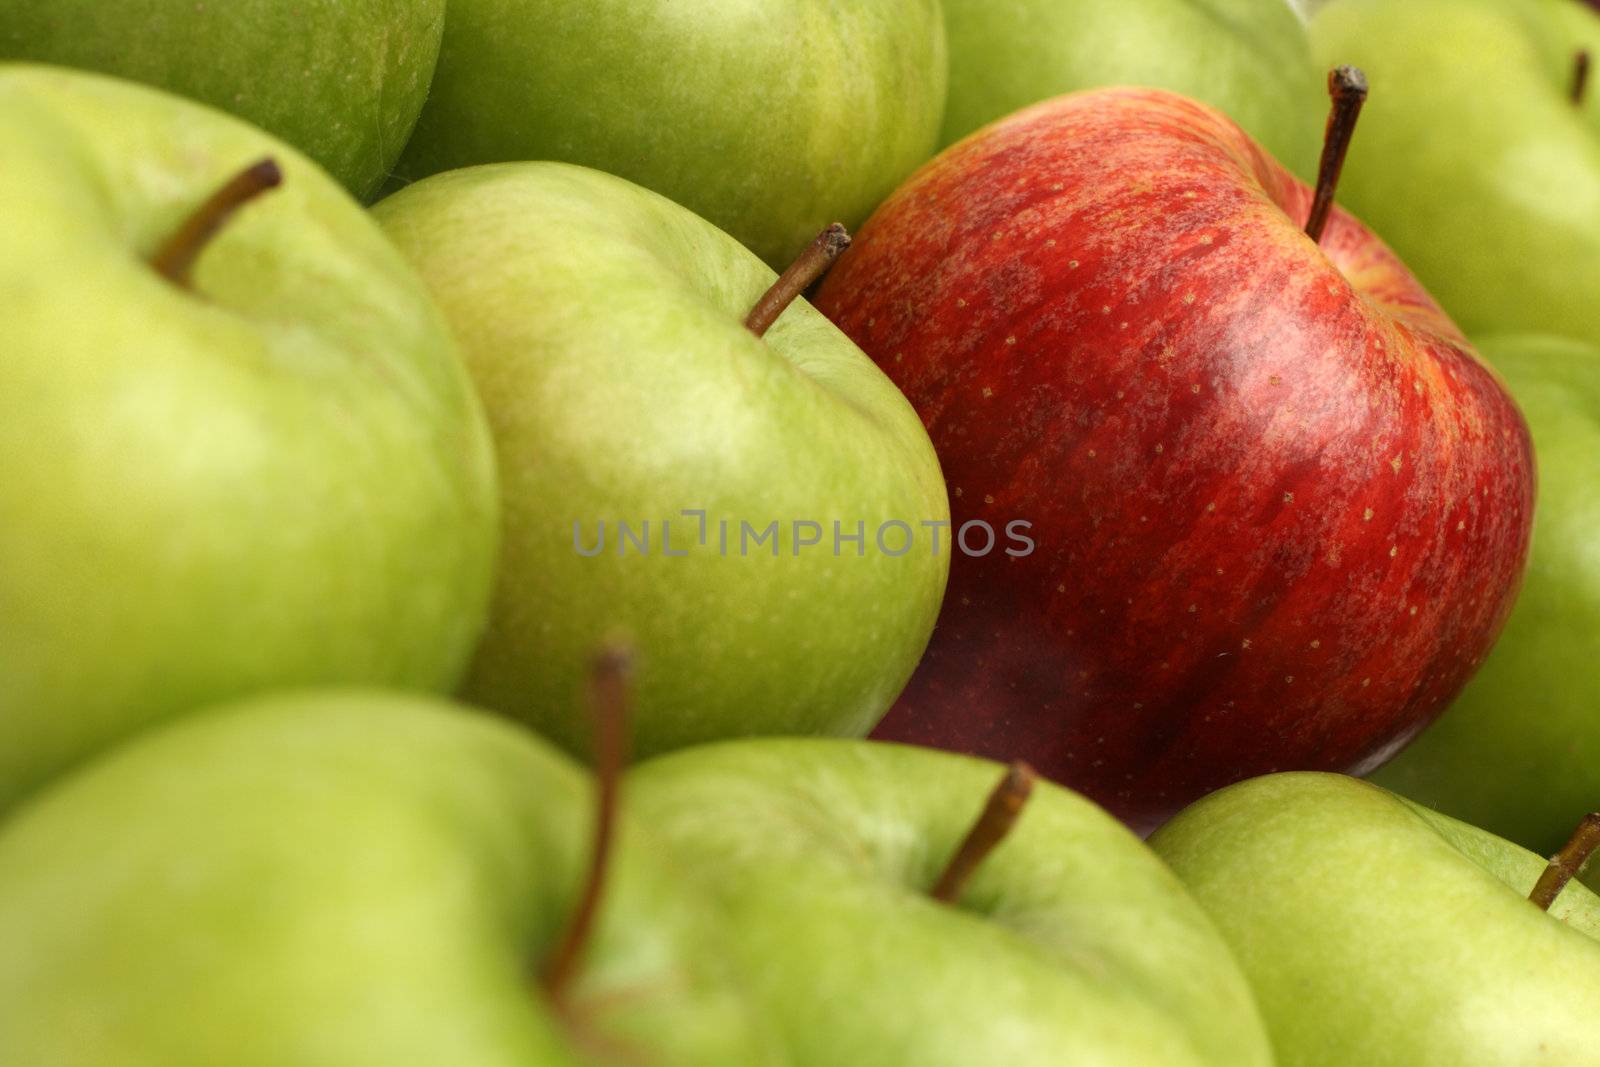 different concepts - red apple between green apples